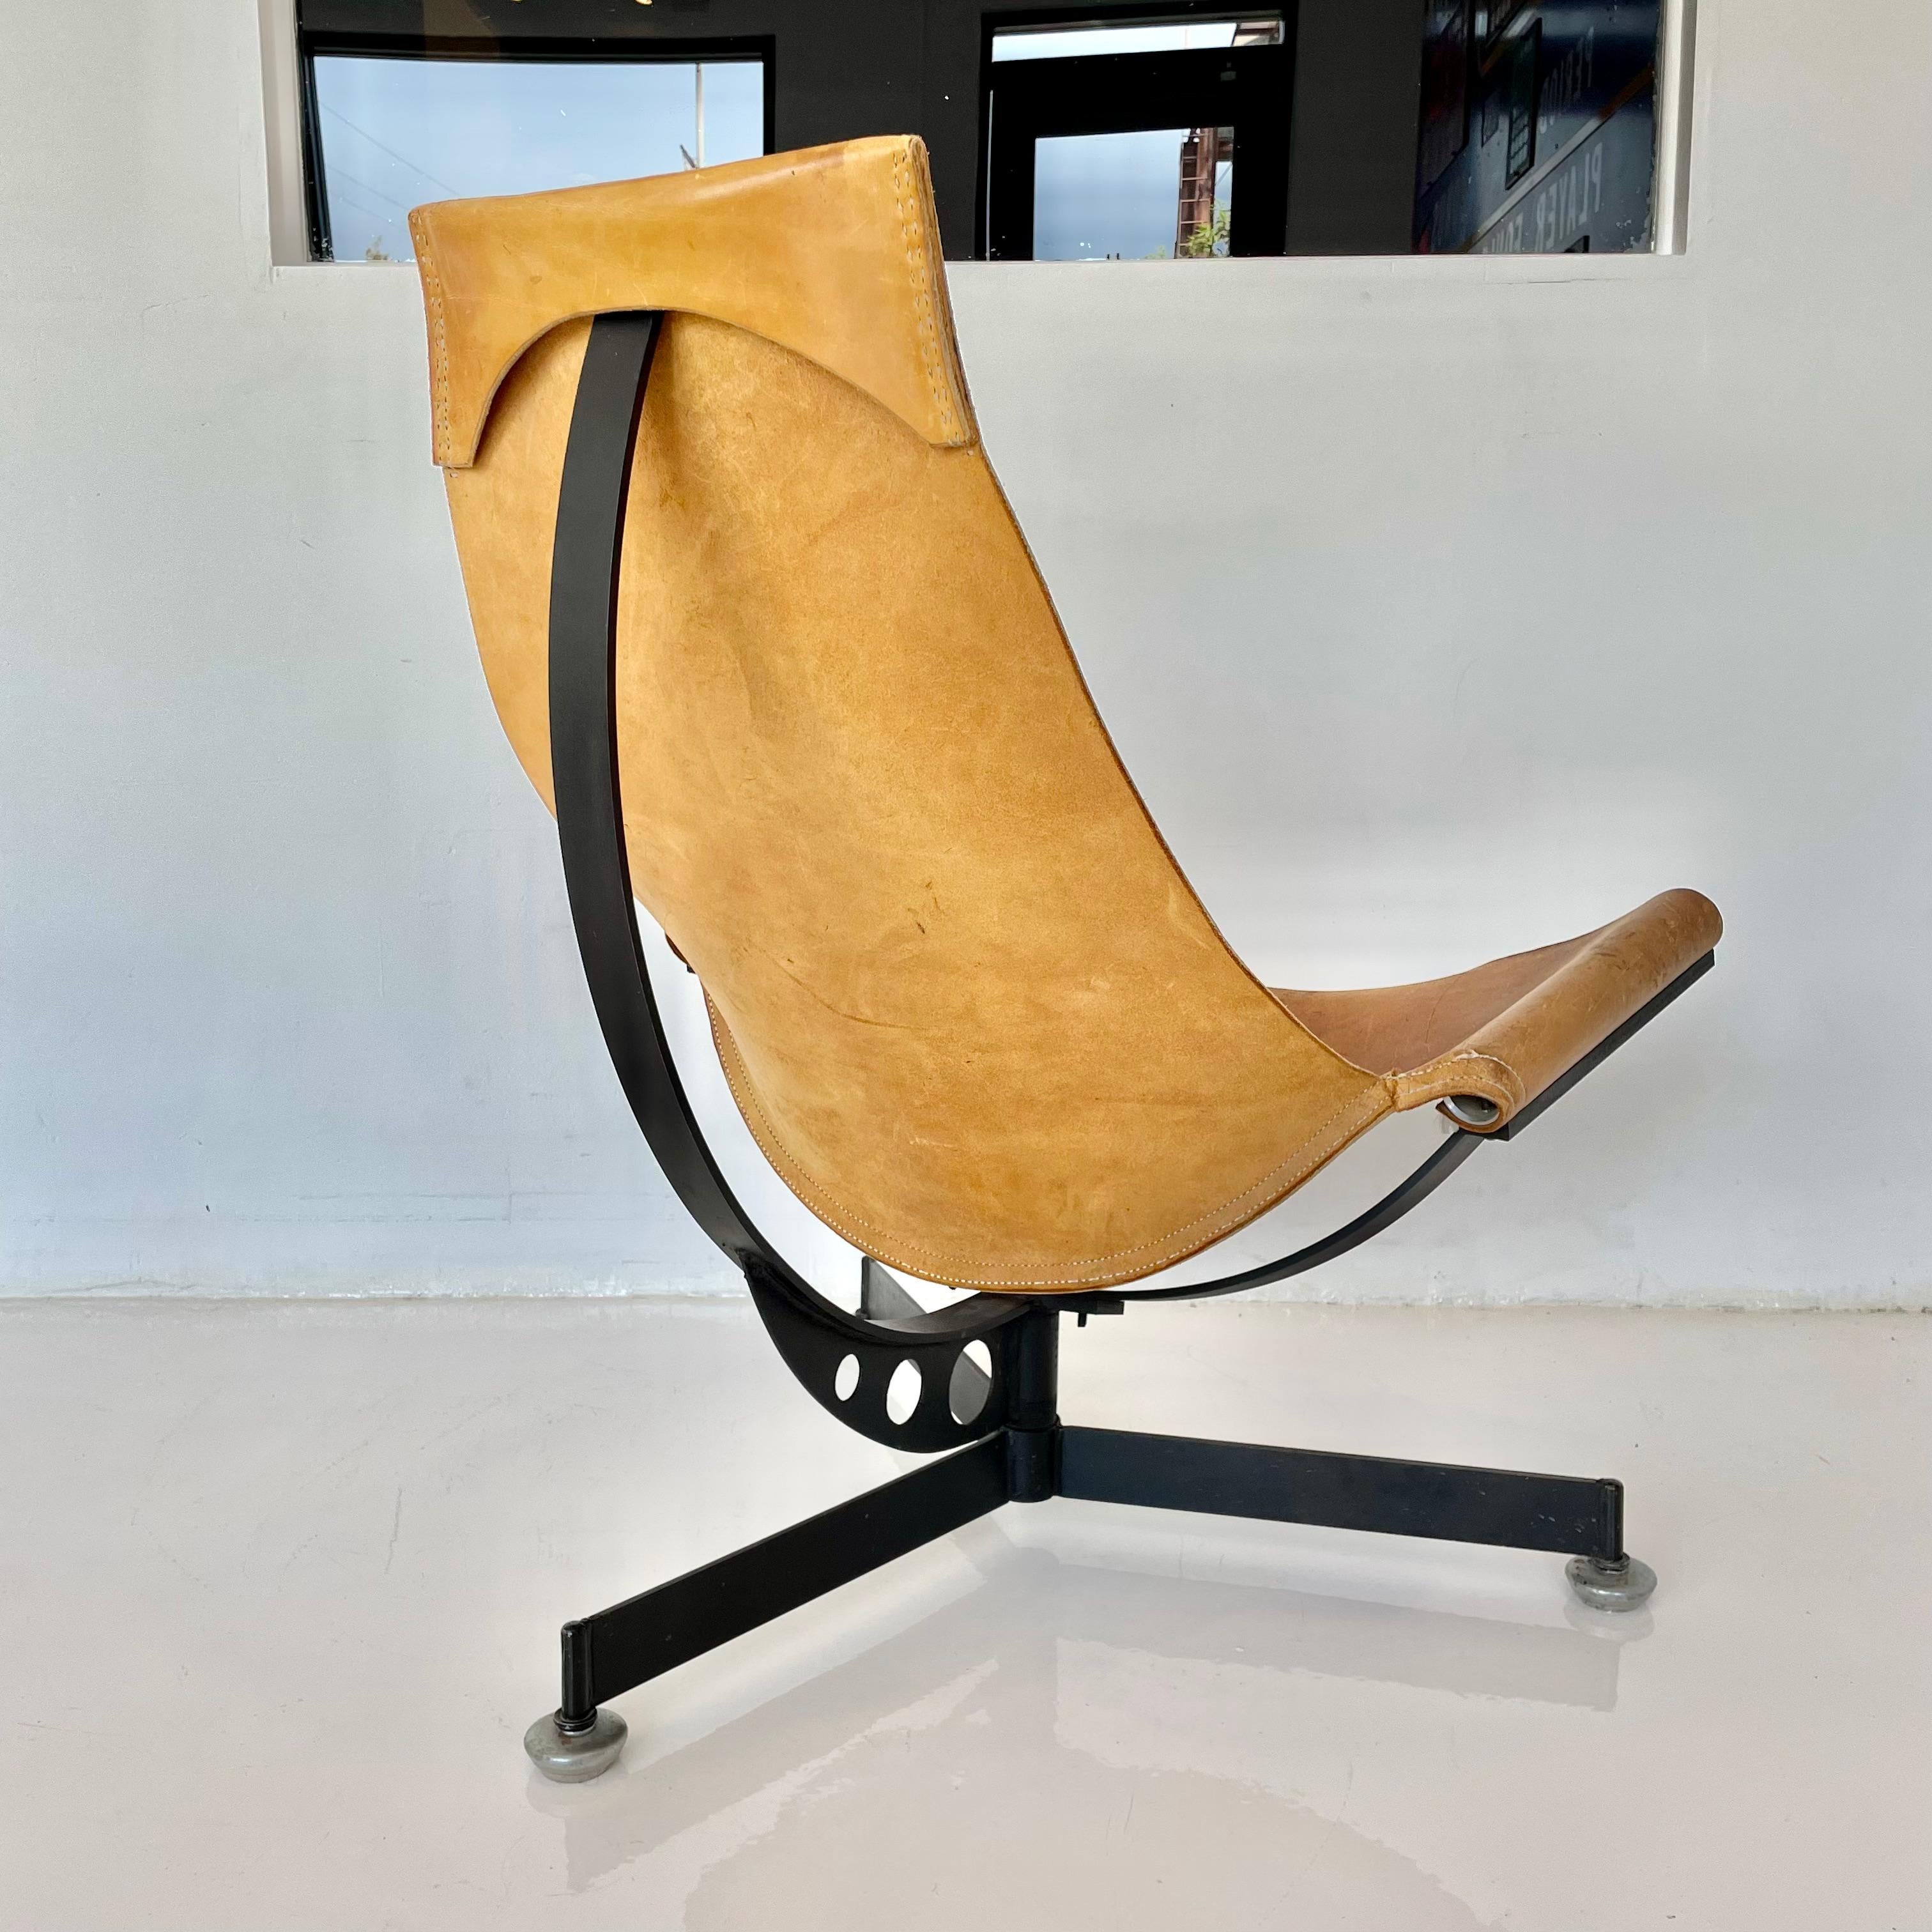 Max Gottschalk Leather and Iron Sling Chair, 1960s For Sale 5